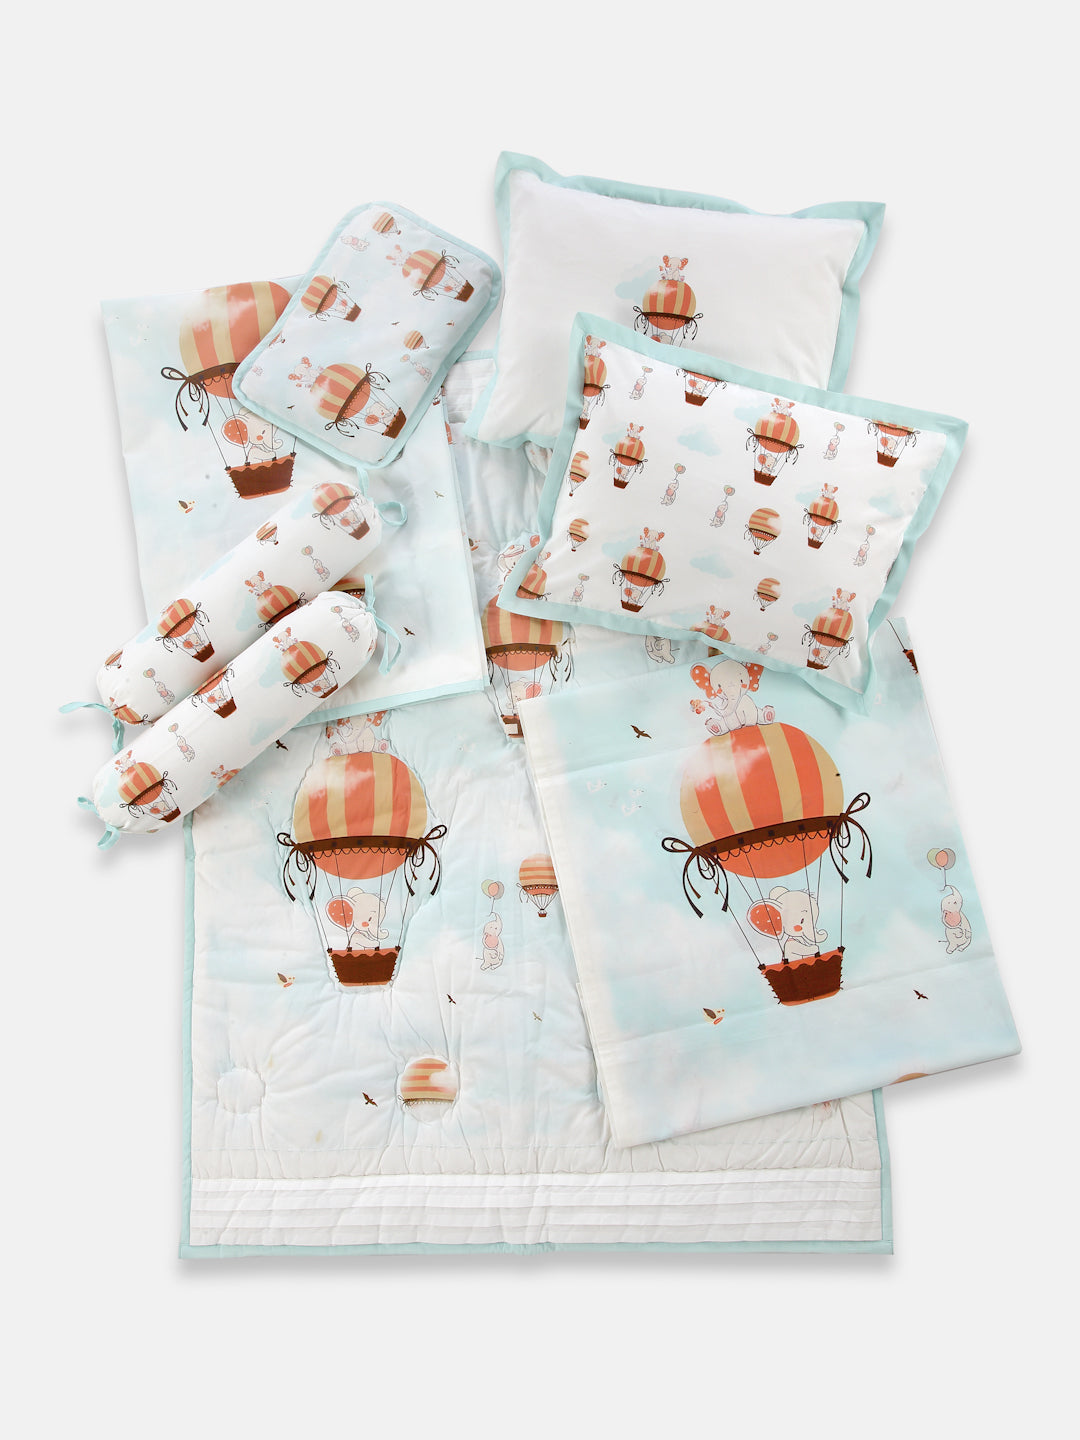 QUILT & BEDDING SET-PACK OF 5 (ELE ON THE BALLOON)